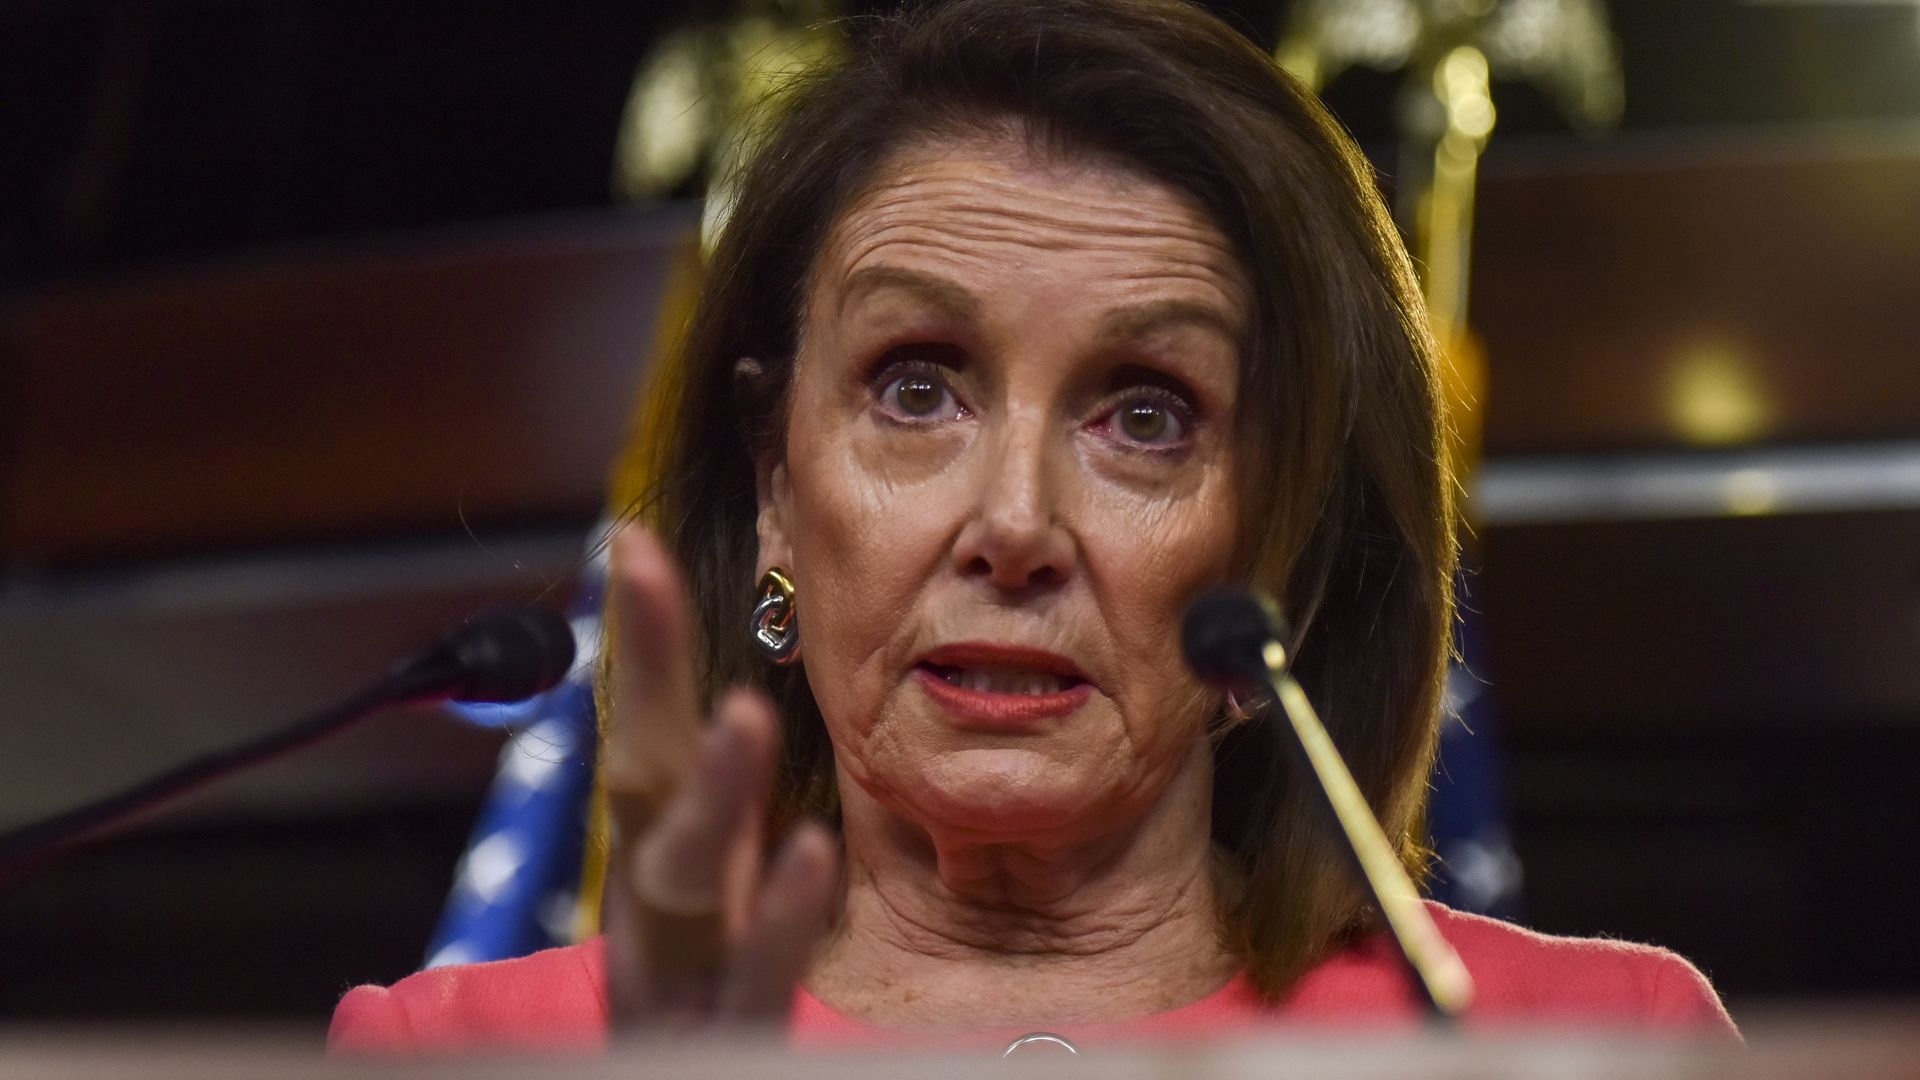 In this image, Pelosi gestures from behind a podium.